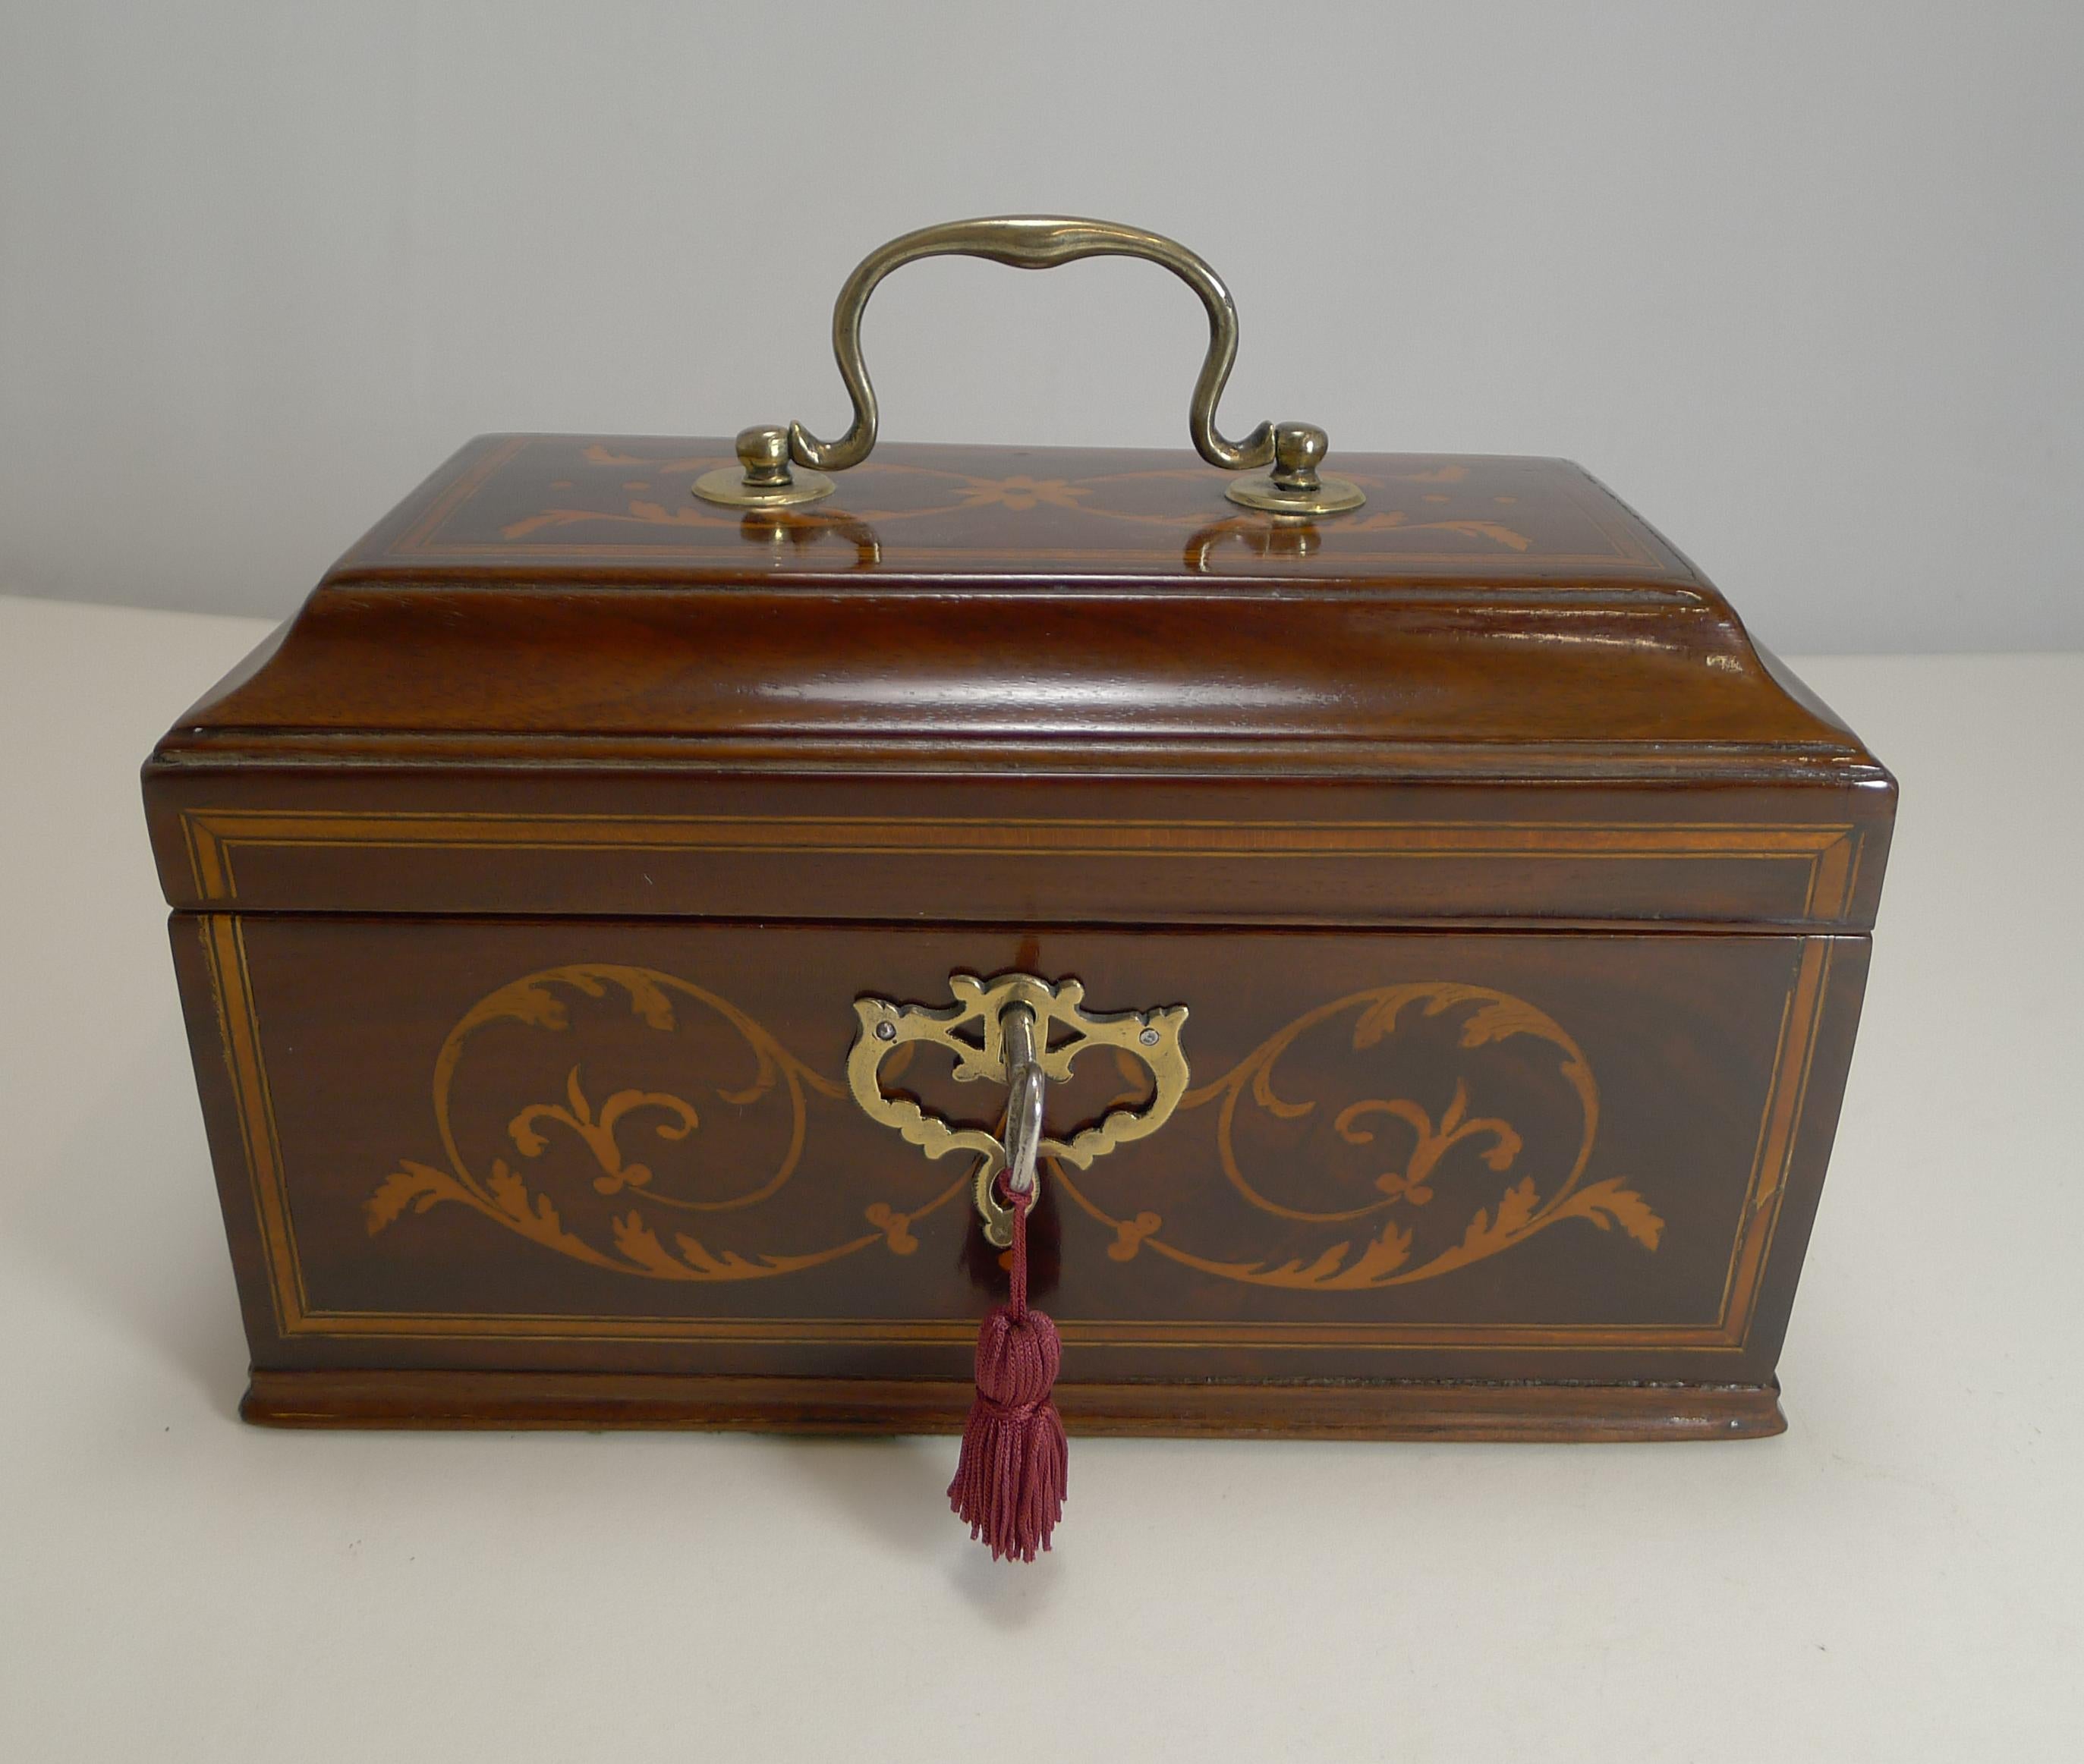 A very handsome George III tea caddy, made from Mahogany and beautifully inlaid with panels and highly decorative foliate marquetry to the front and top. The top has a handsome cast brass handle with a complimentary cast brass escutcheon which